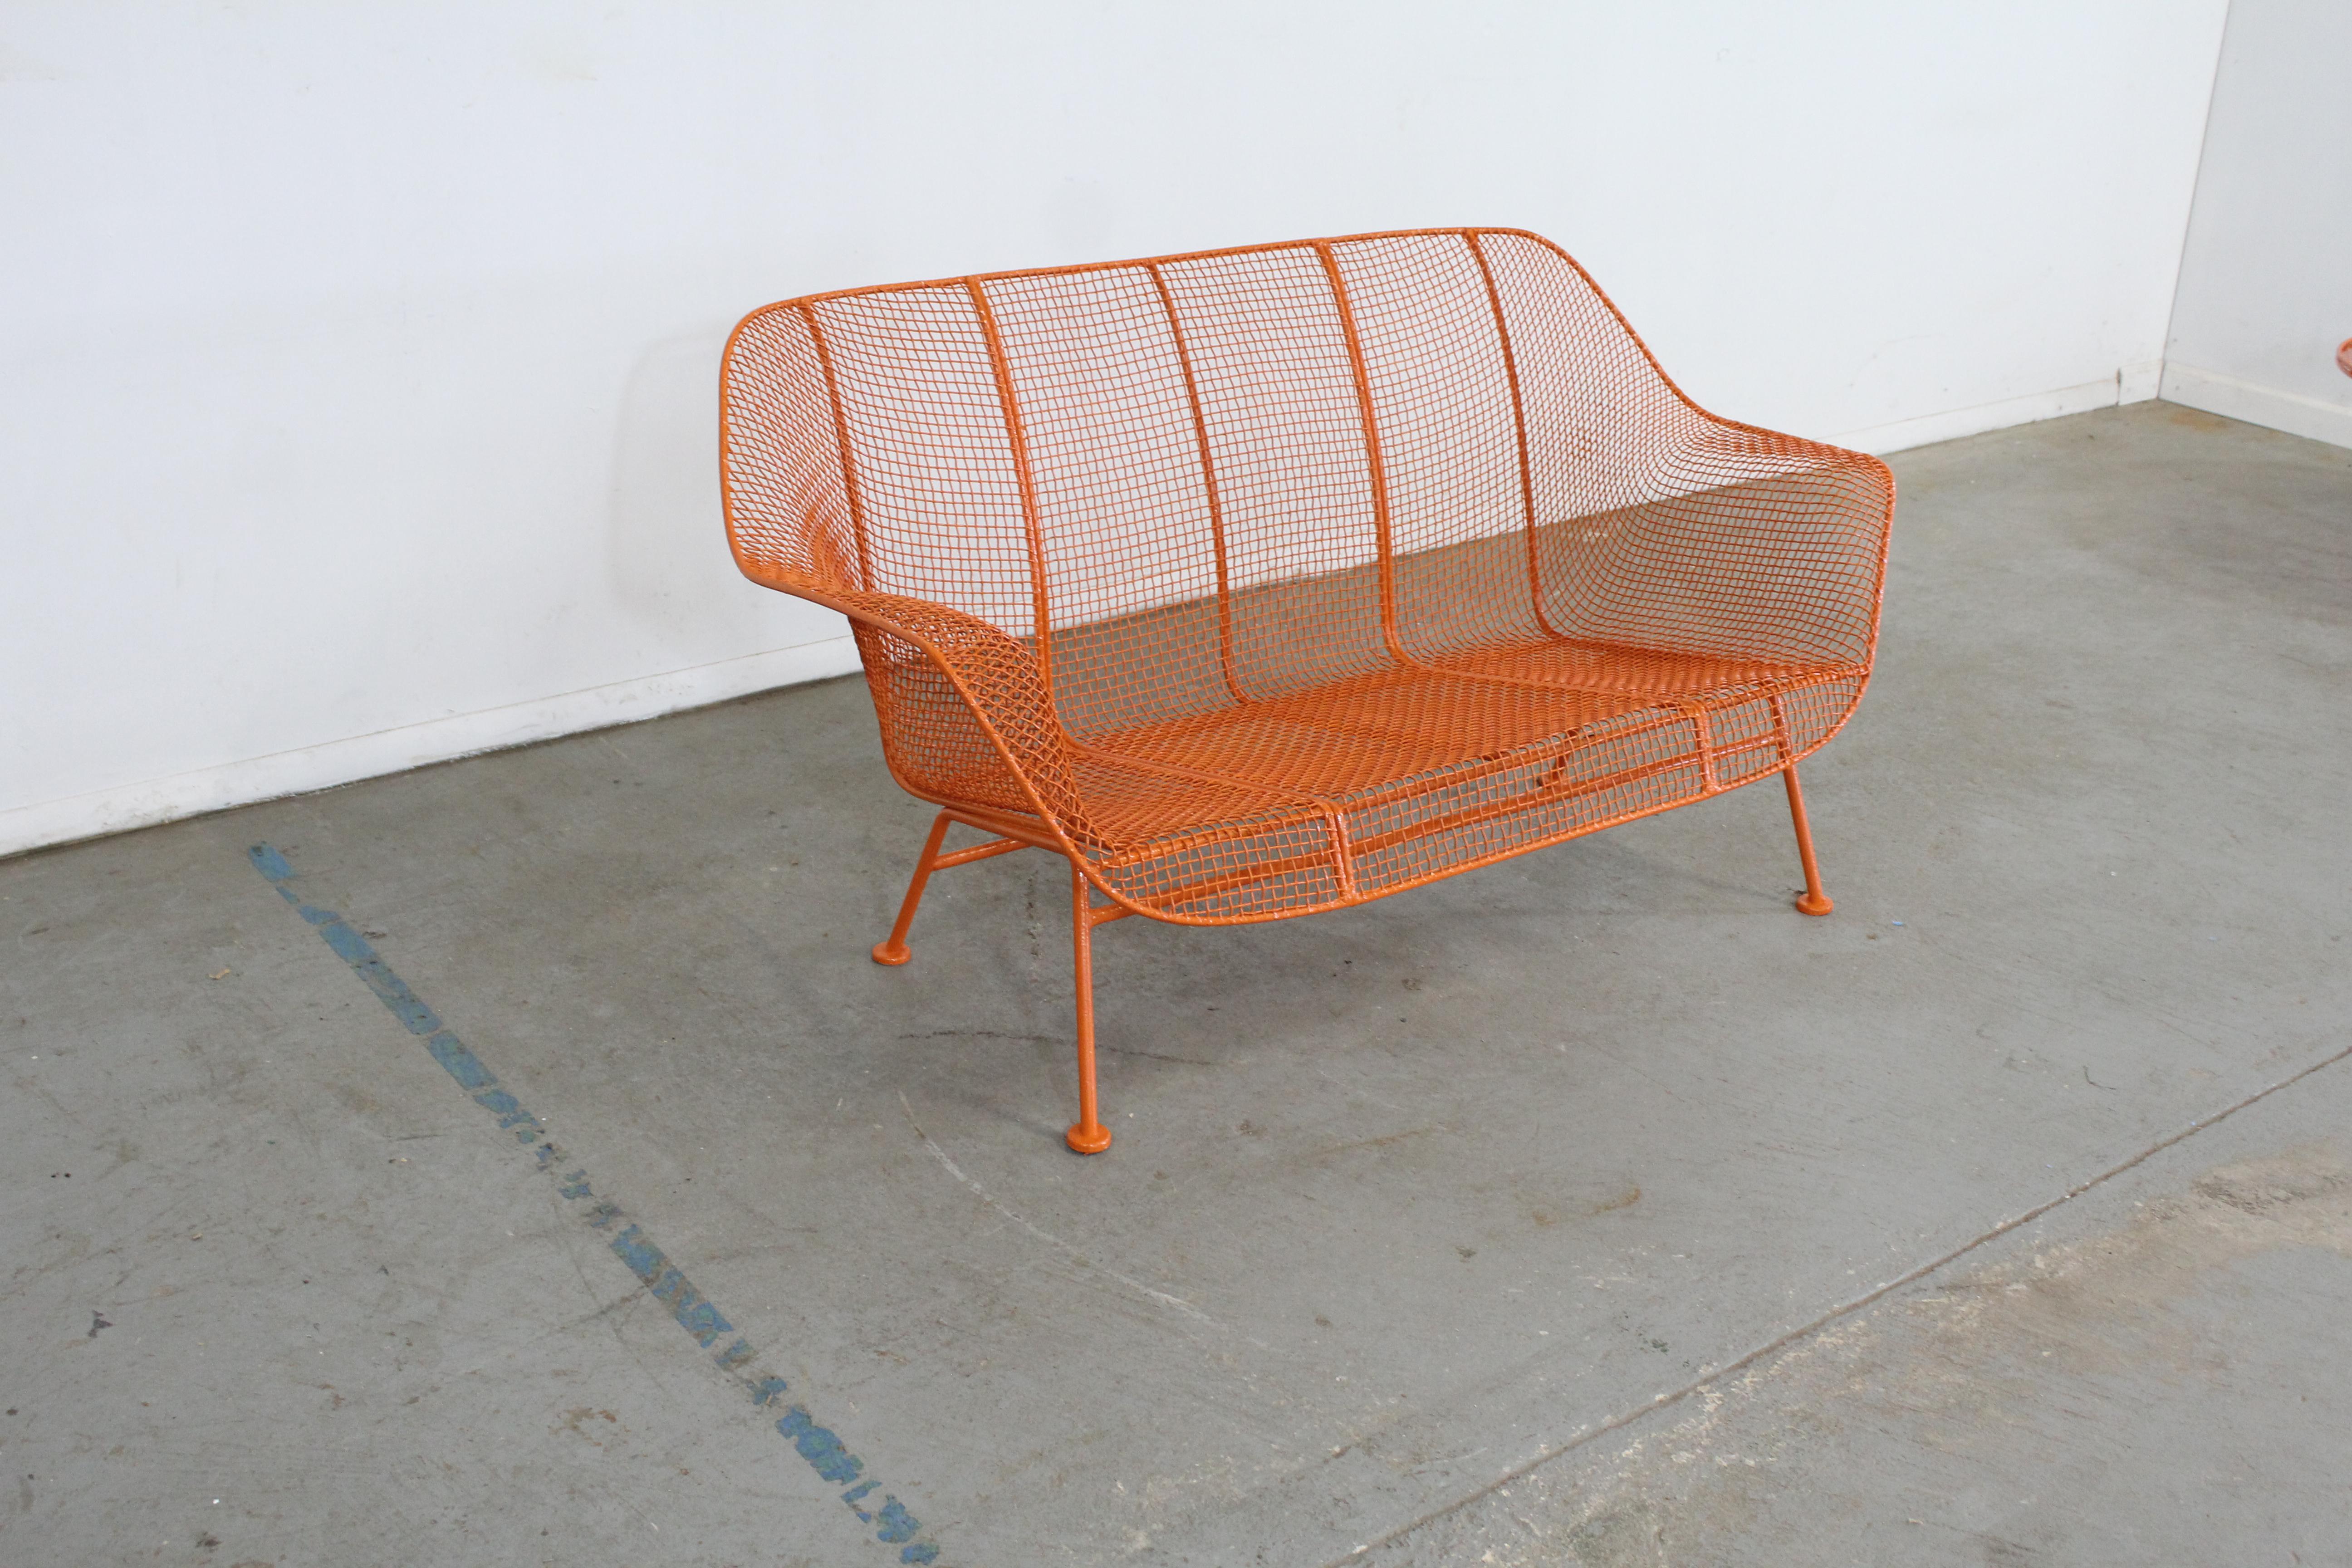 Offered is a vintage outdoor bench by Russell Woodard 'Sculptura'. It has a wrought iron frame with a low-slung woven mesh steel seat made to withstand all weather conditions. Perfect for outdoor lounging. It is in good condition, structurally